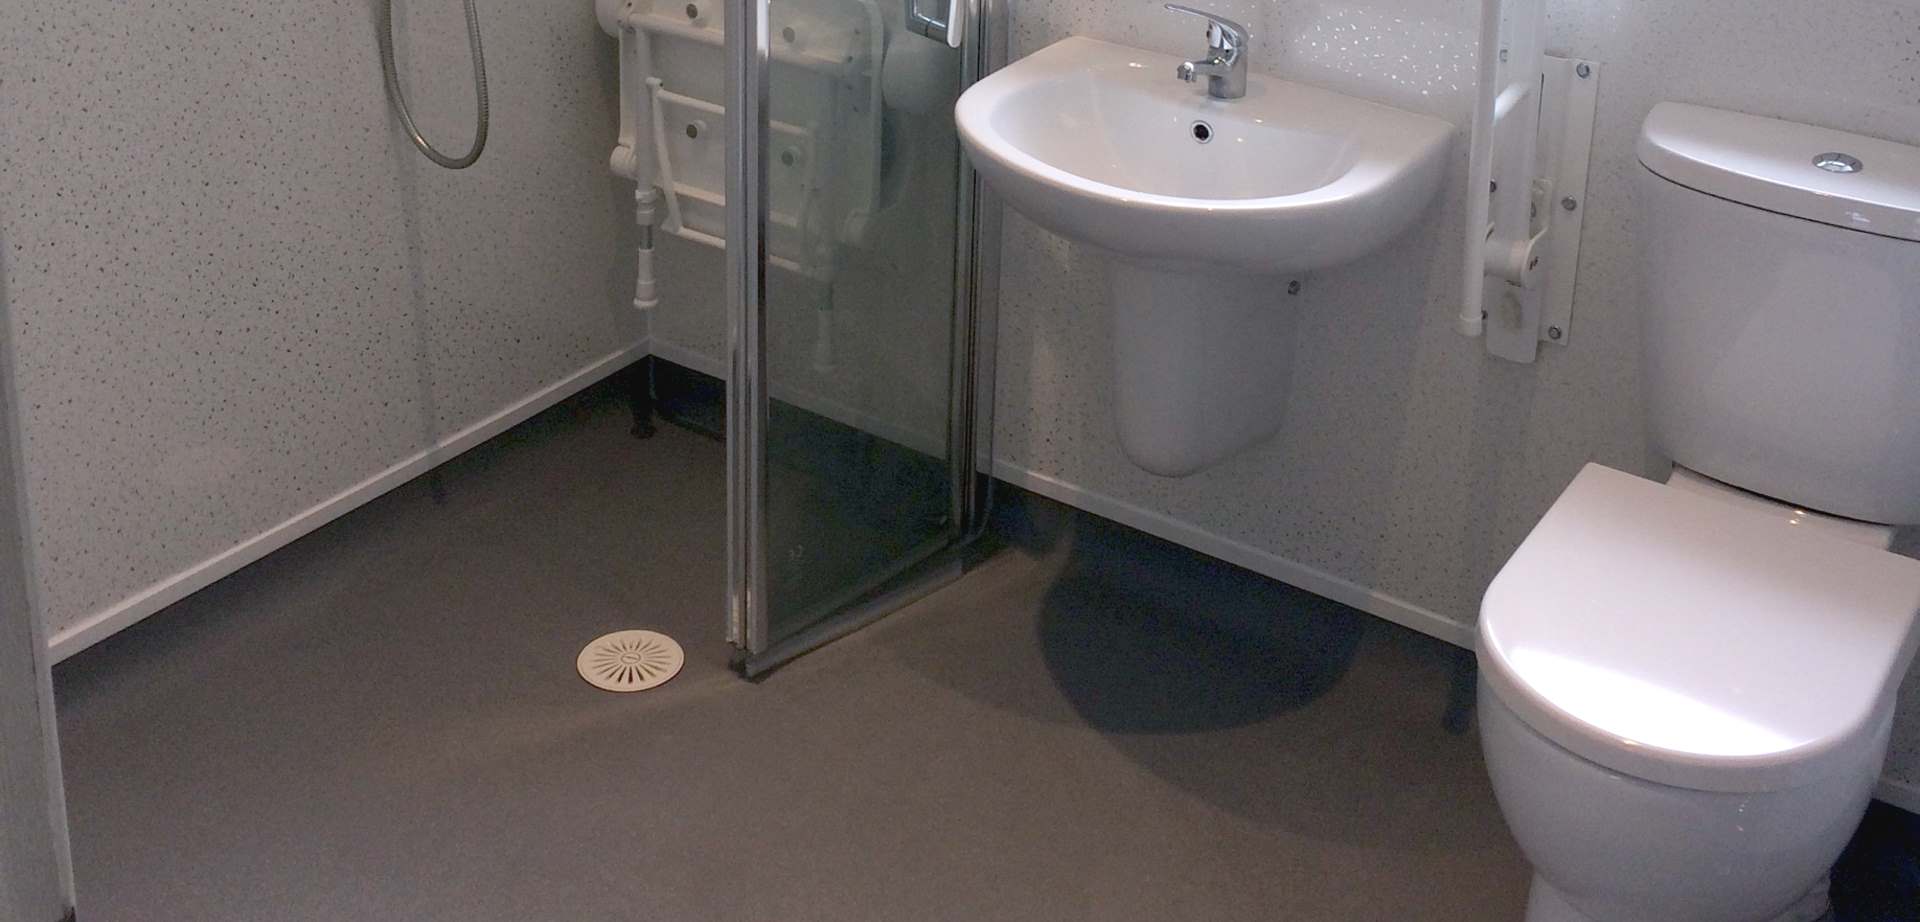 Wetroom Installers in Hinckley and The Midlands